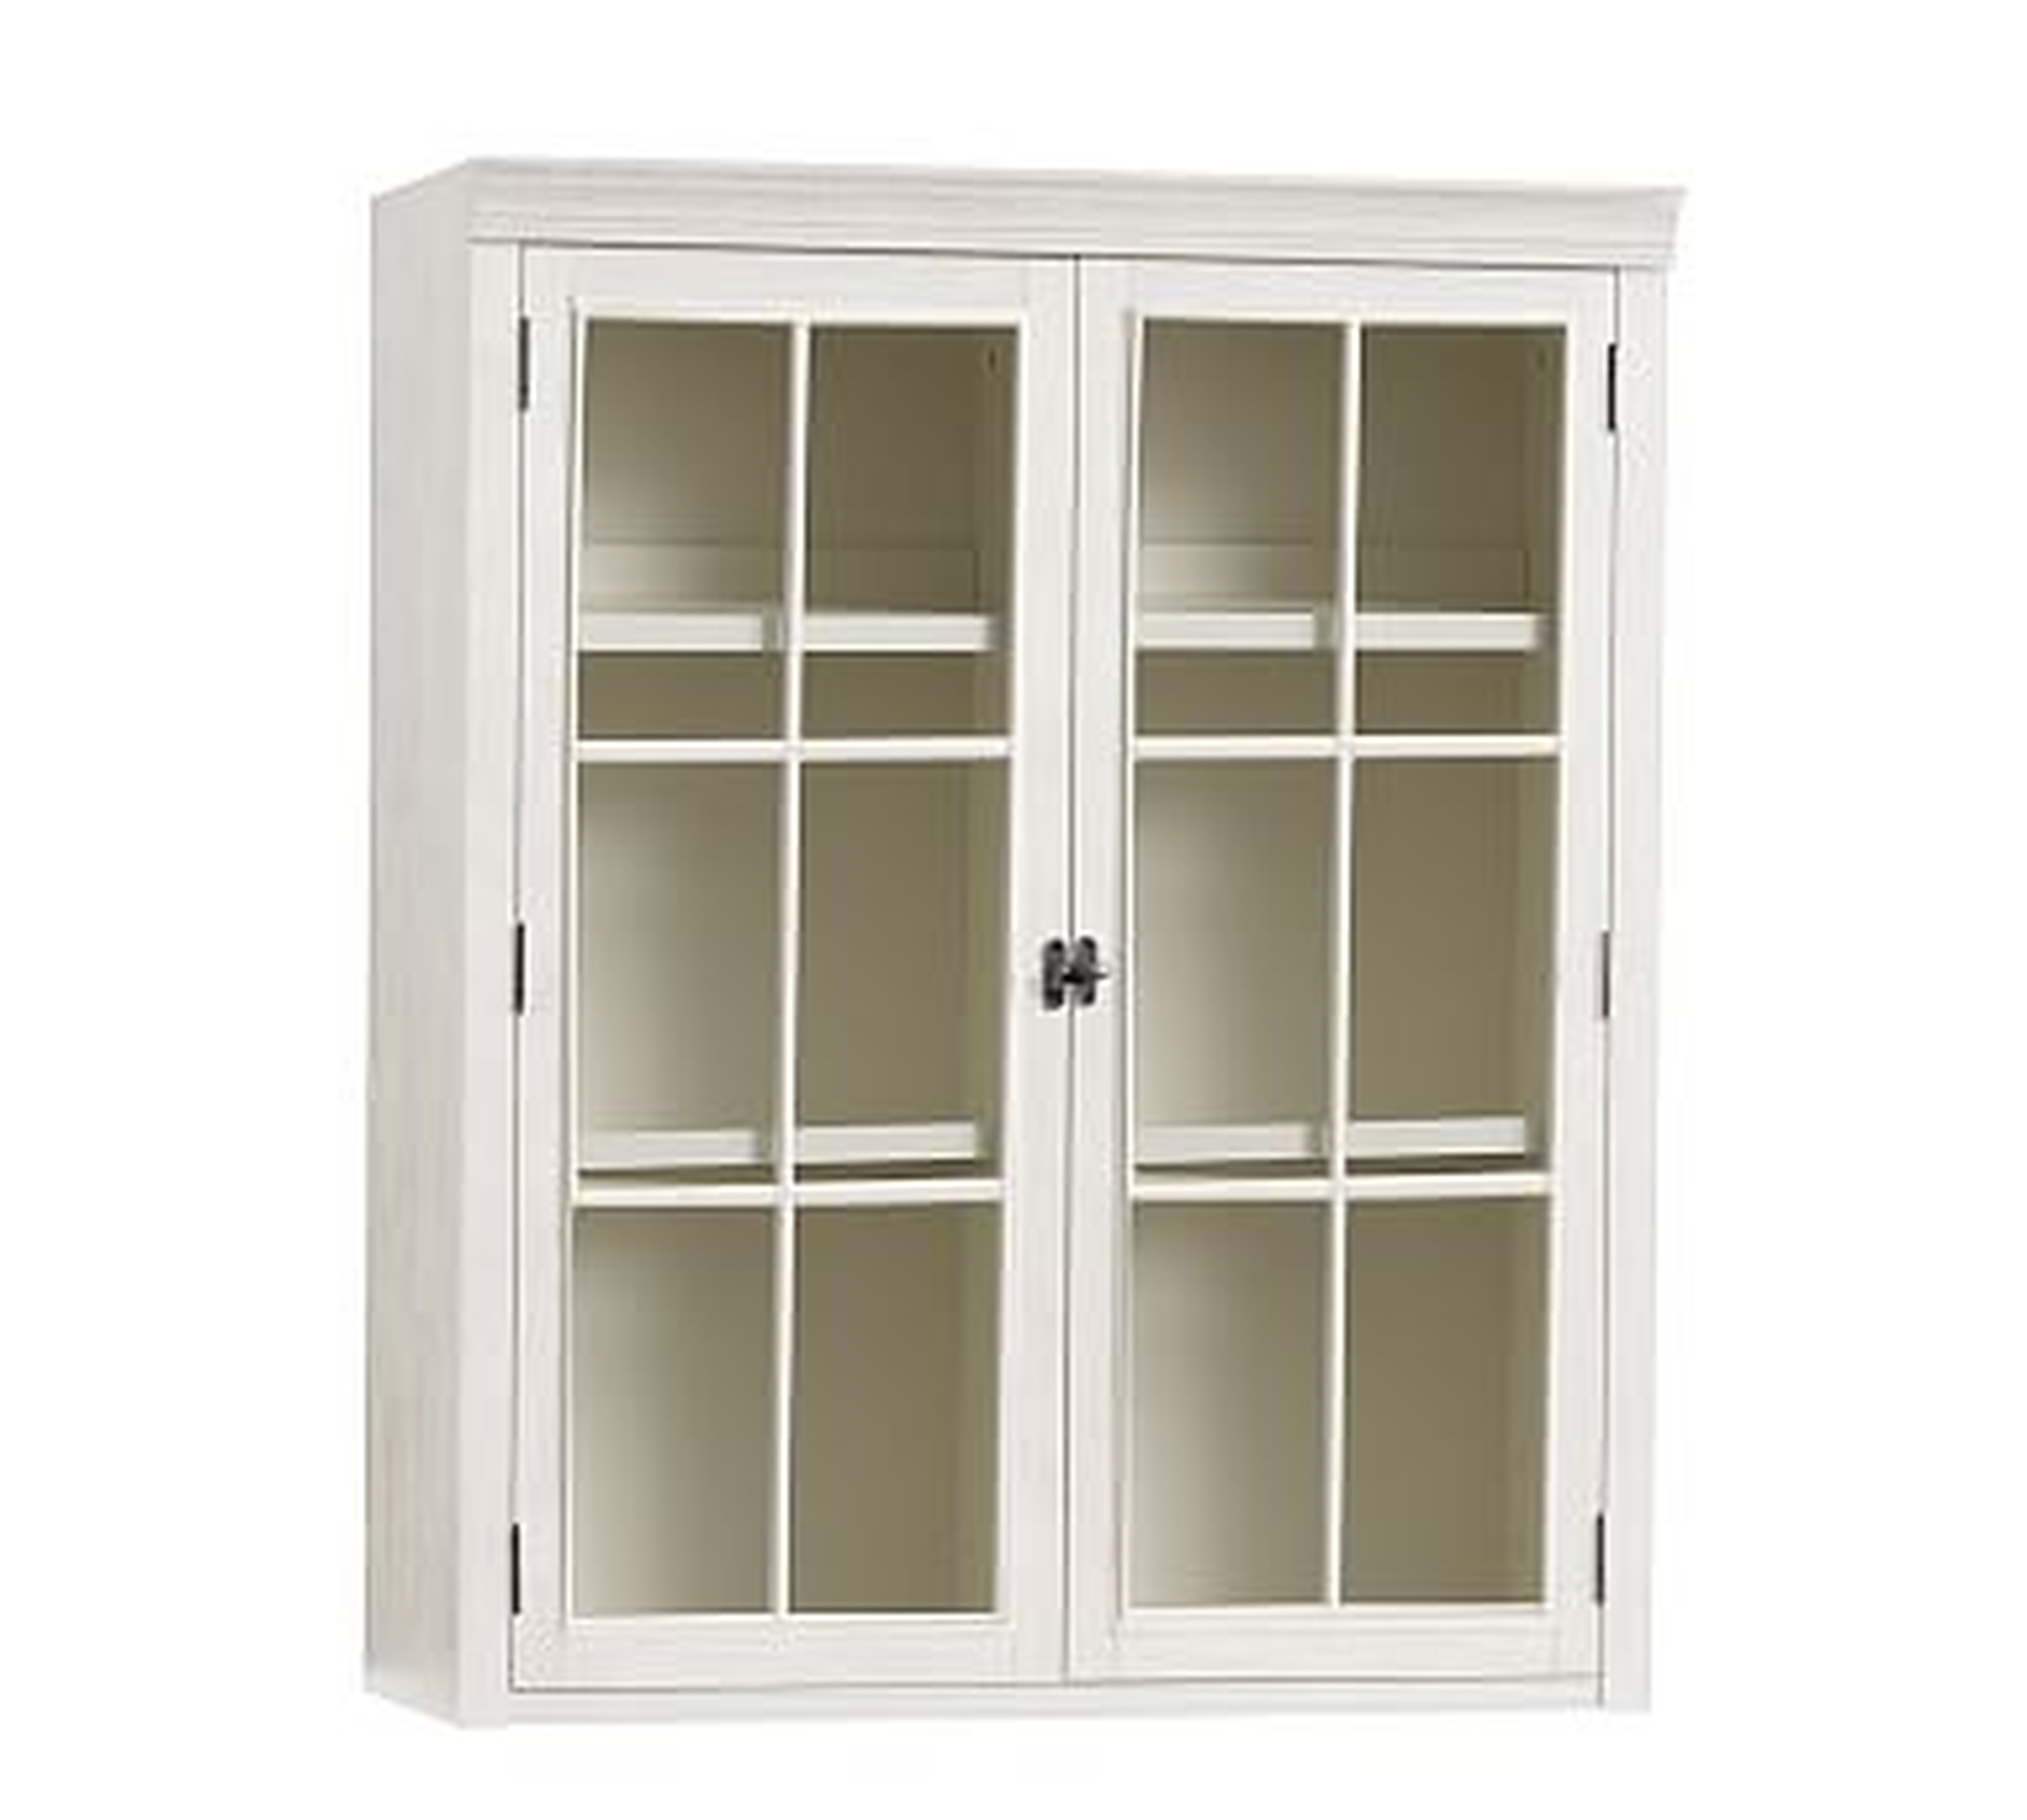 Logan Hutch With Glass Doors, Alabaster, 36" Wide - Pottery Barn